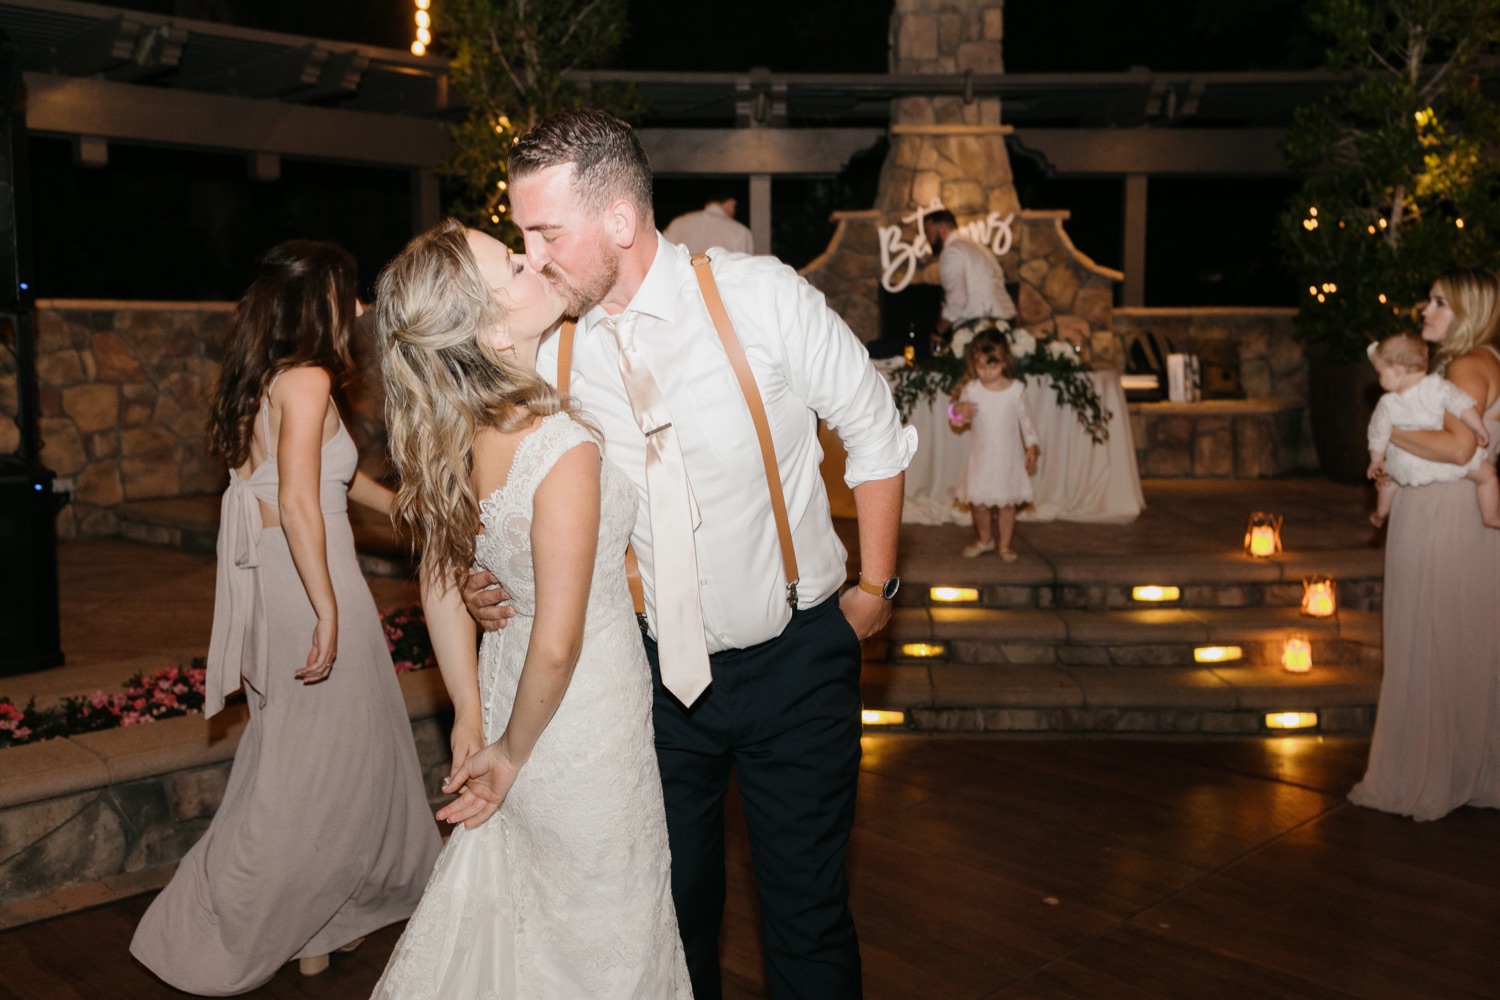 bride and groom kiss on the dance floor at their wedding reception at walnut grove